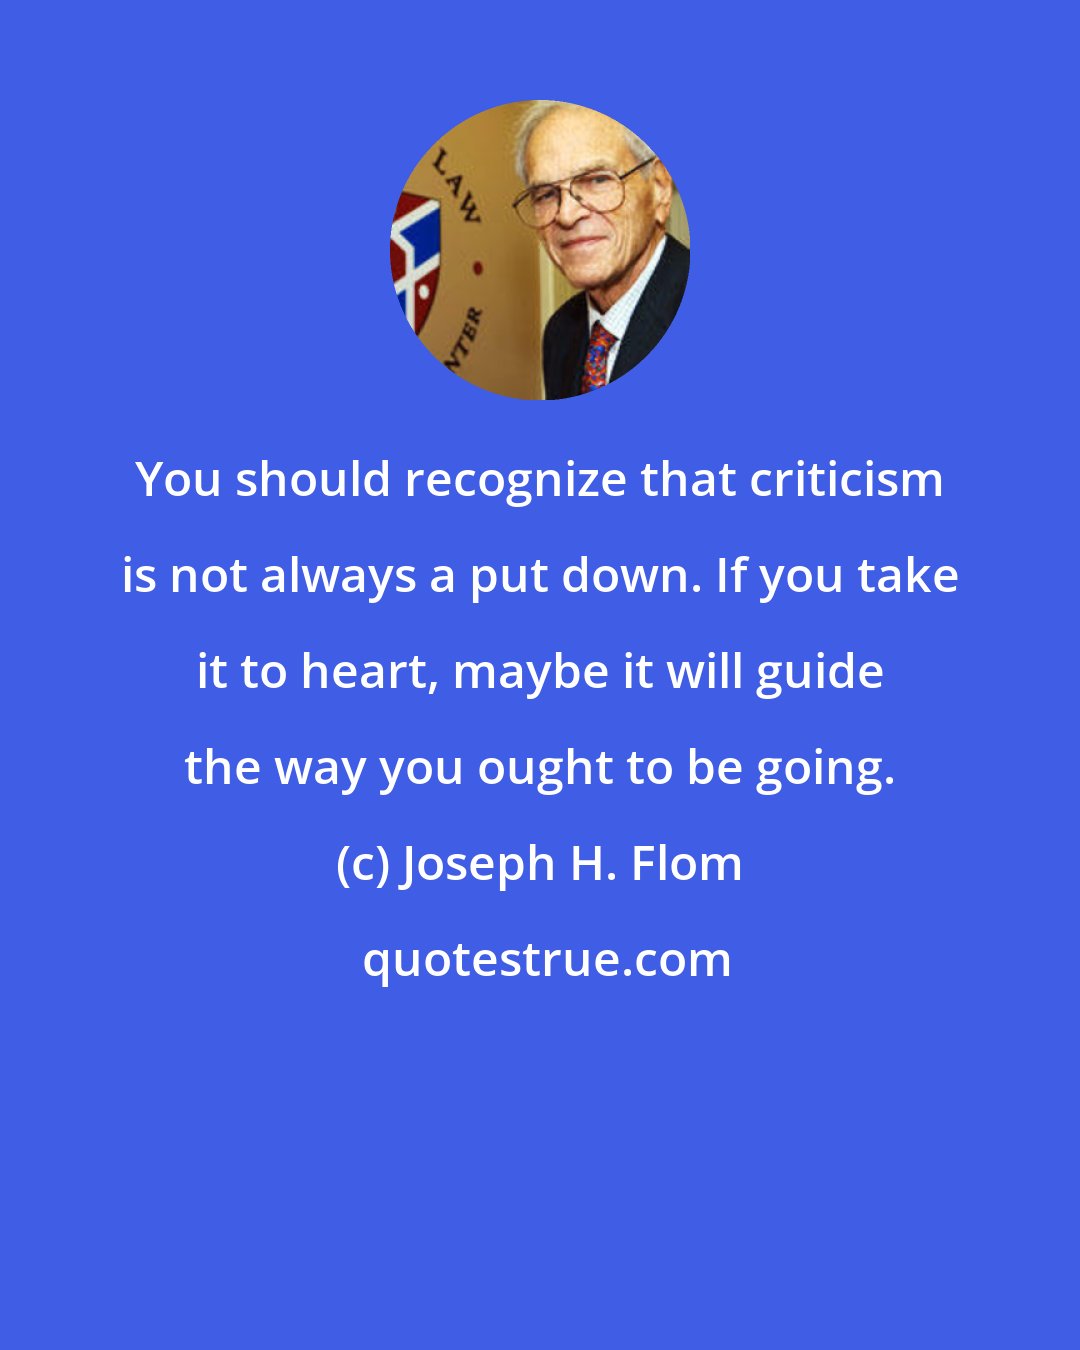 Joseph H. Flom: You should recognize that criticism is not always a put down. If you take it to heart, maybe it will guide the way you ought to be going.